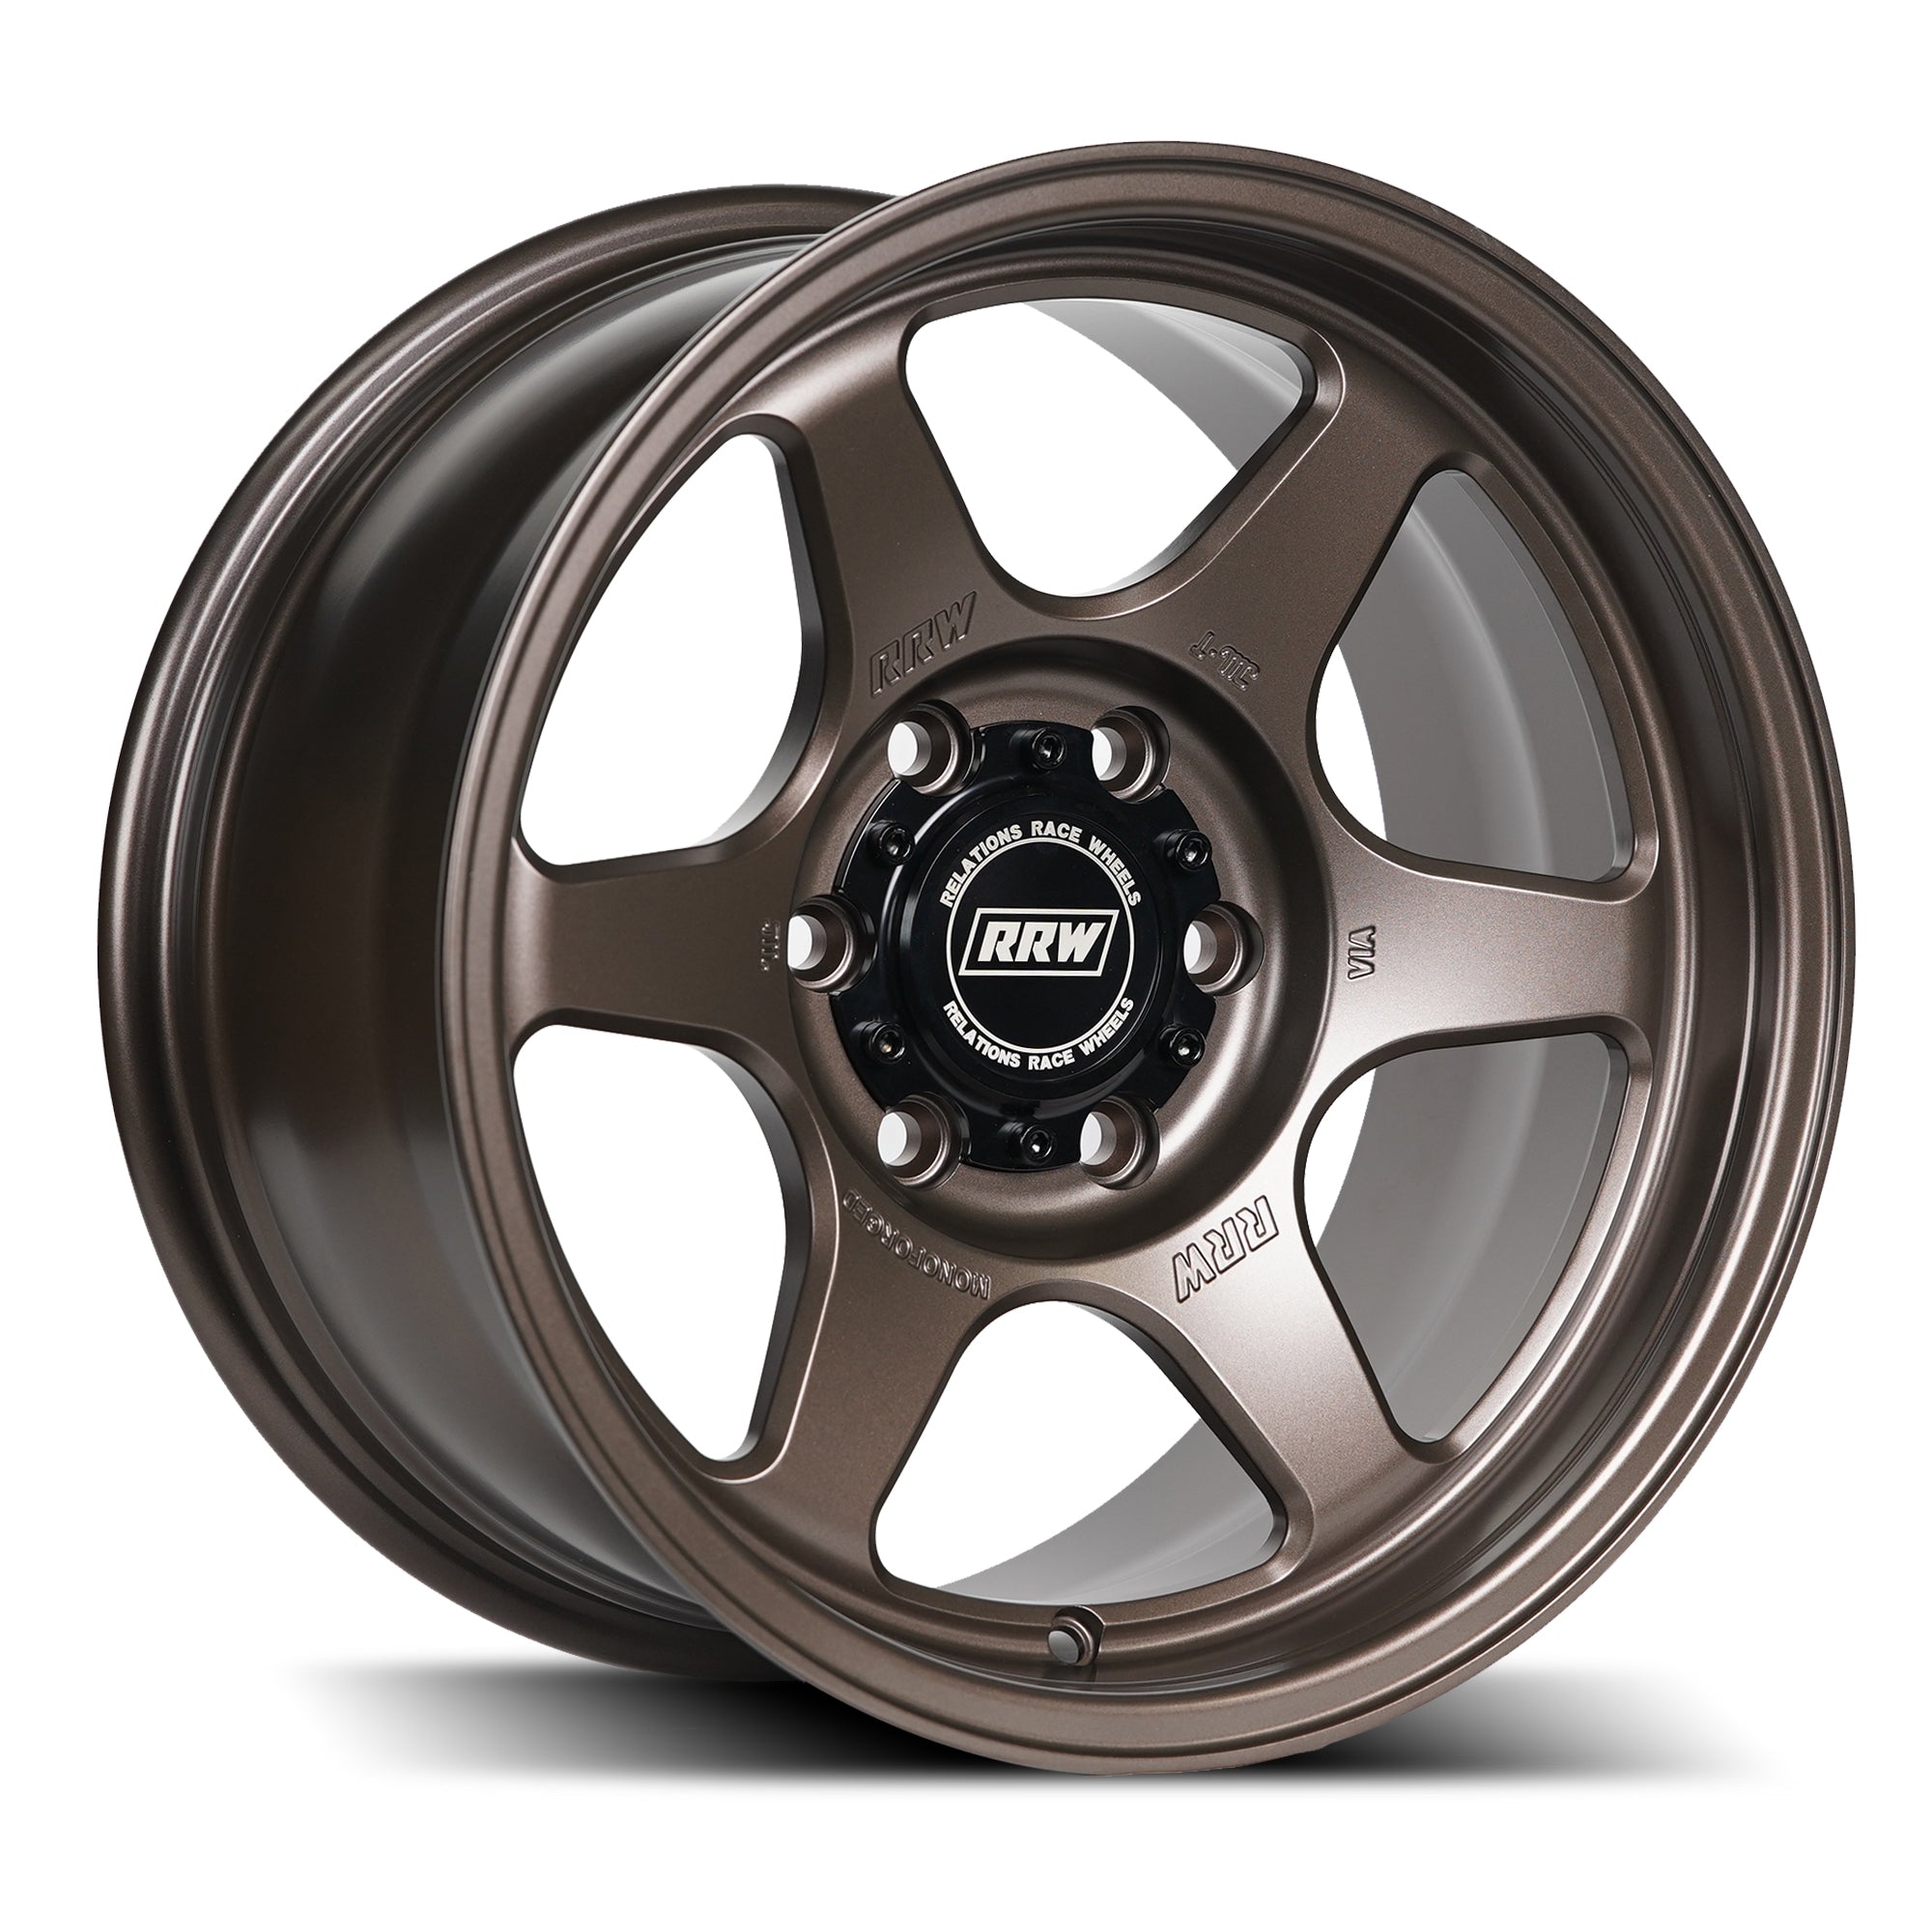 RS2-S 17x8.5 MonoForged Wheel - Relations Race Wheels